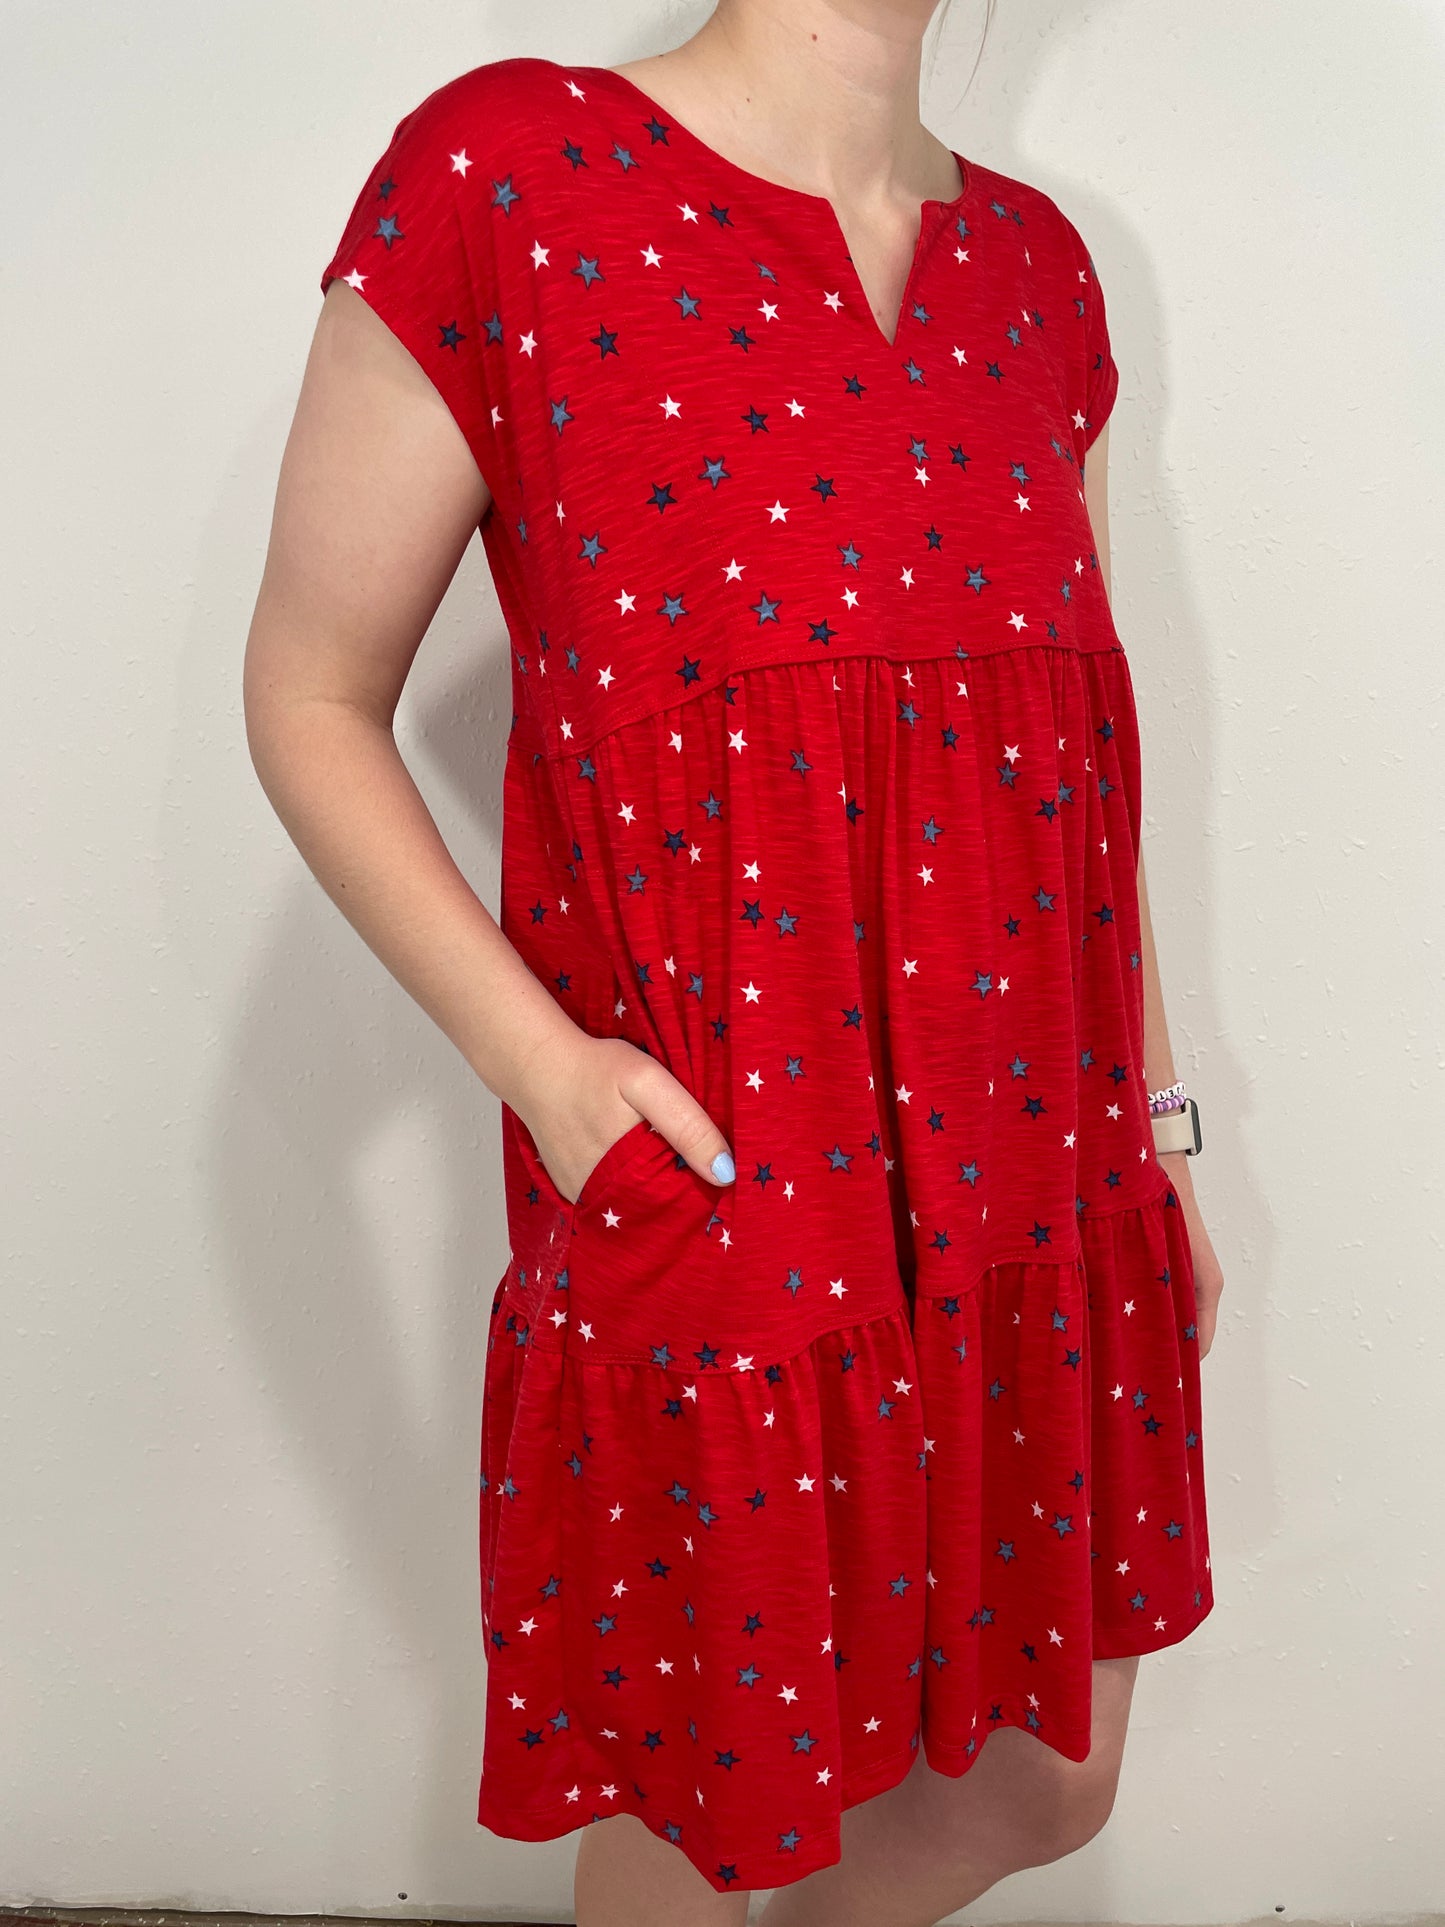 OH MY STARS TIERED DRESS - RED/WHITE/BLUE